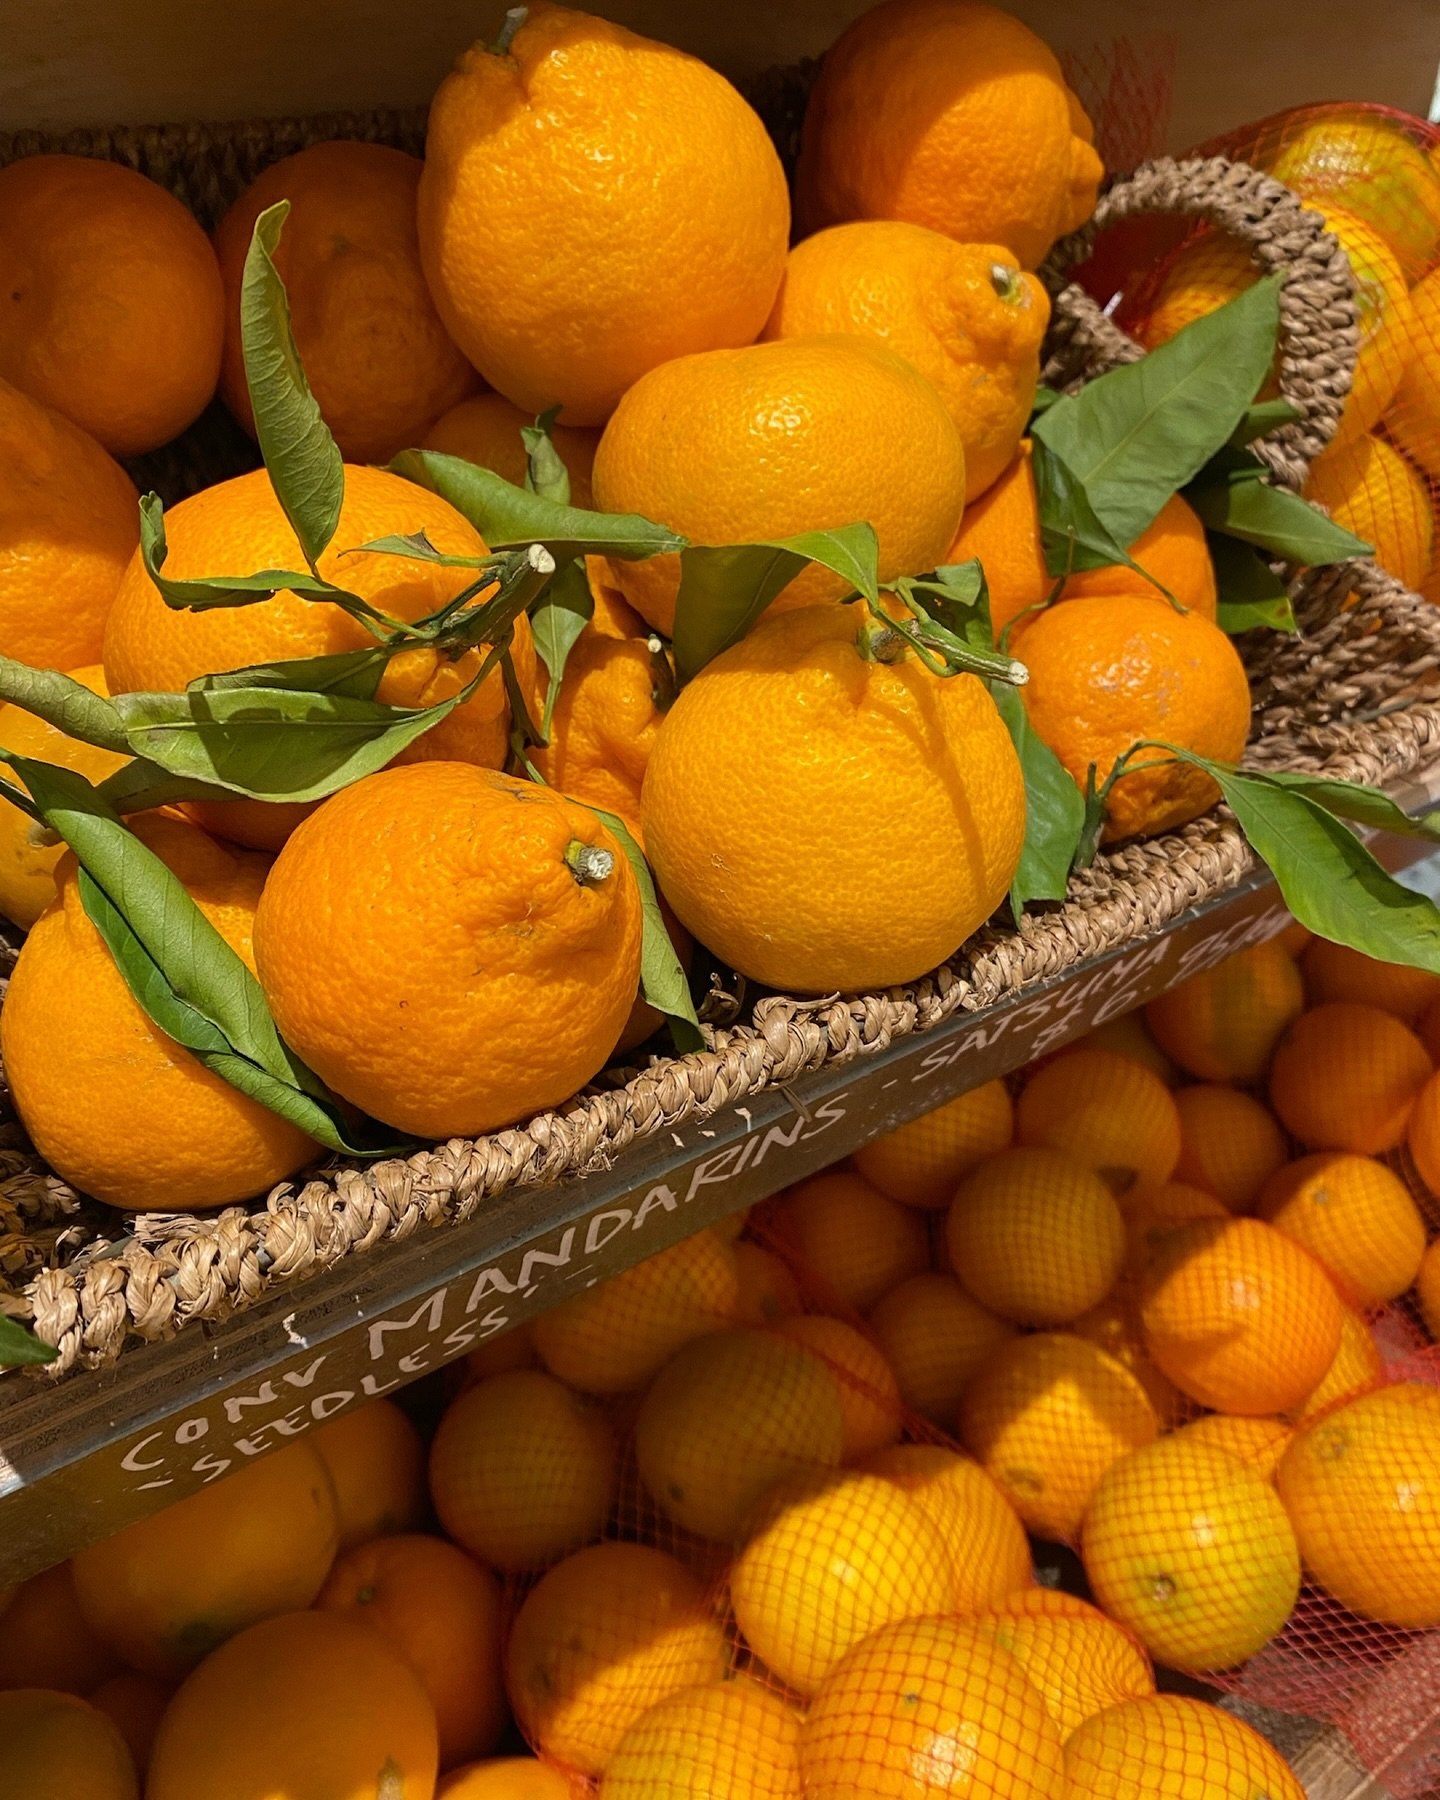 Satsuma seedless mandarins 🍊
Find these seasonal delights in store now